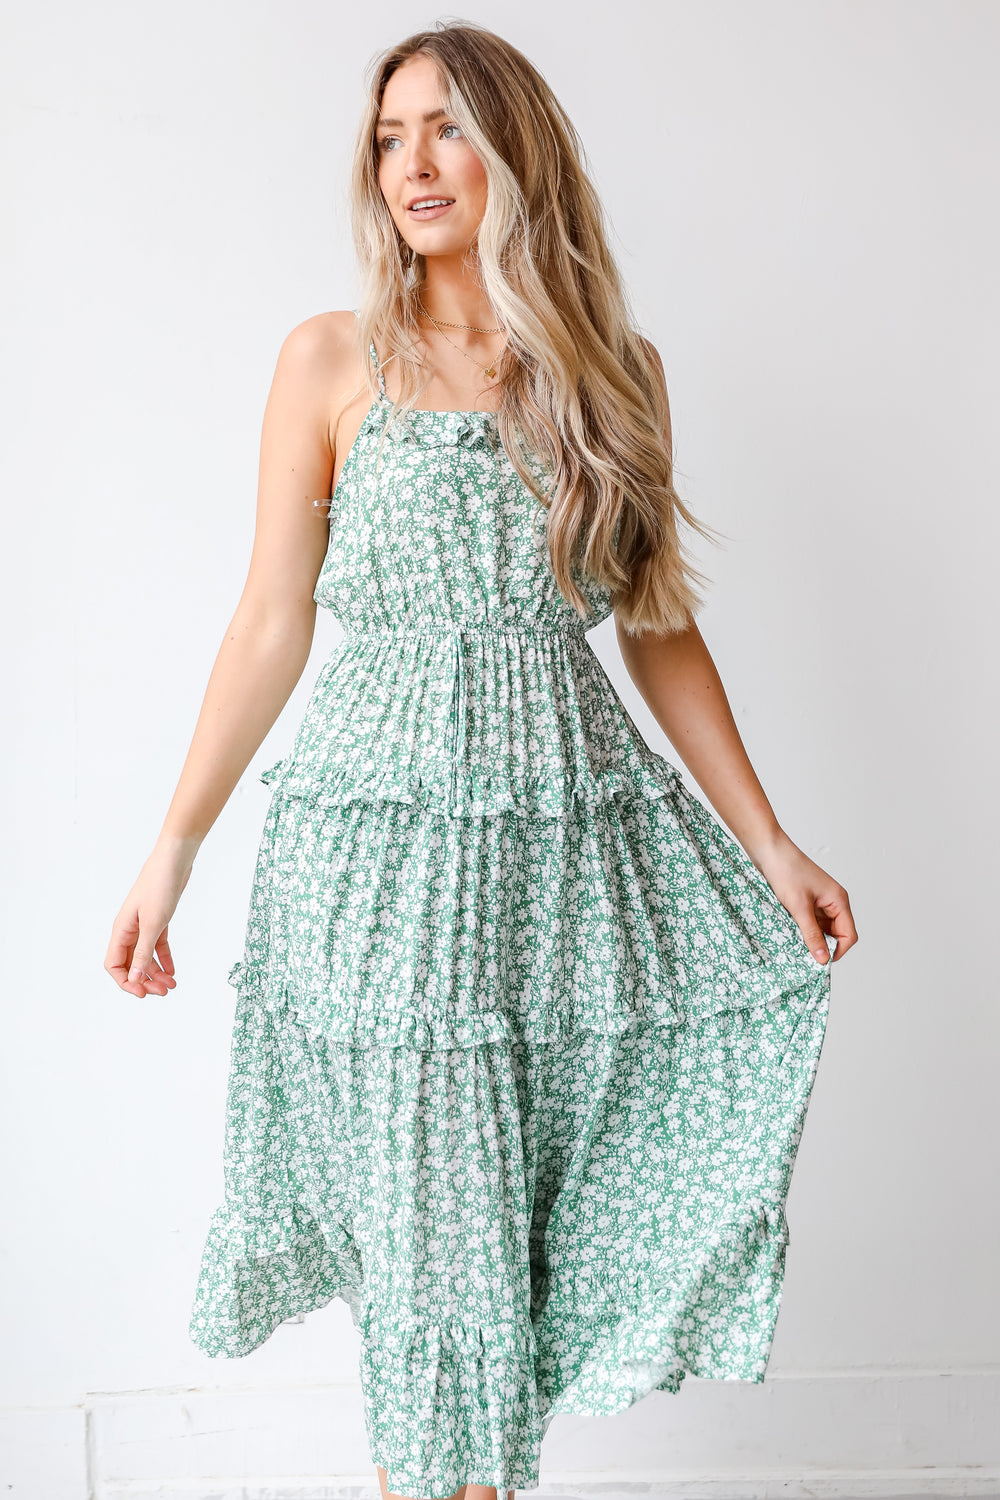 Tiered Floral Maxi Dress from dress up